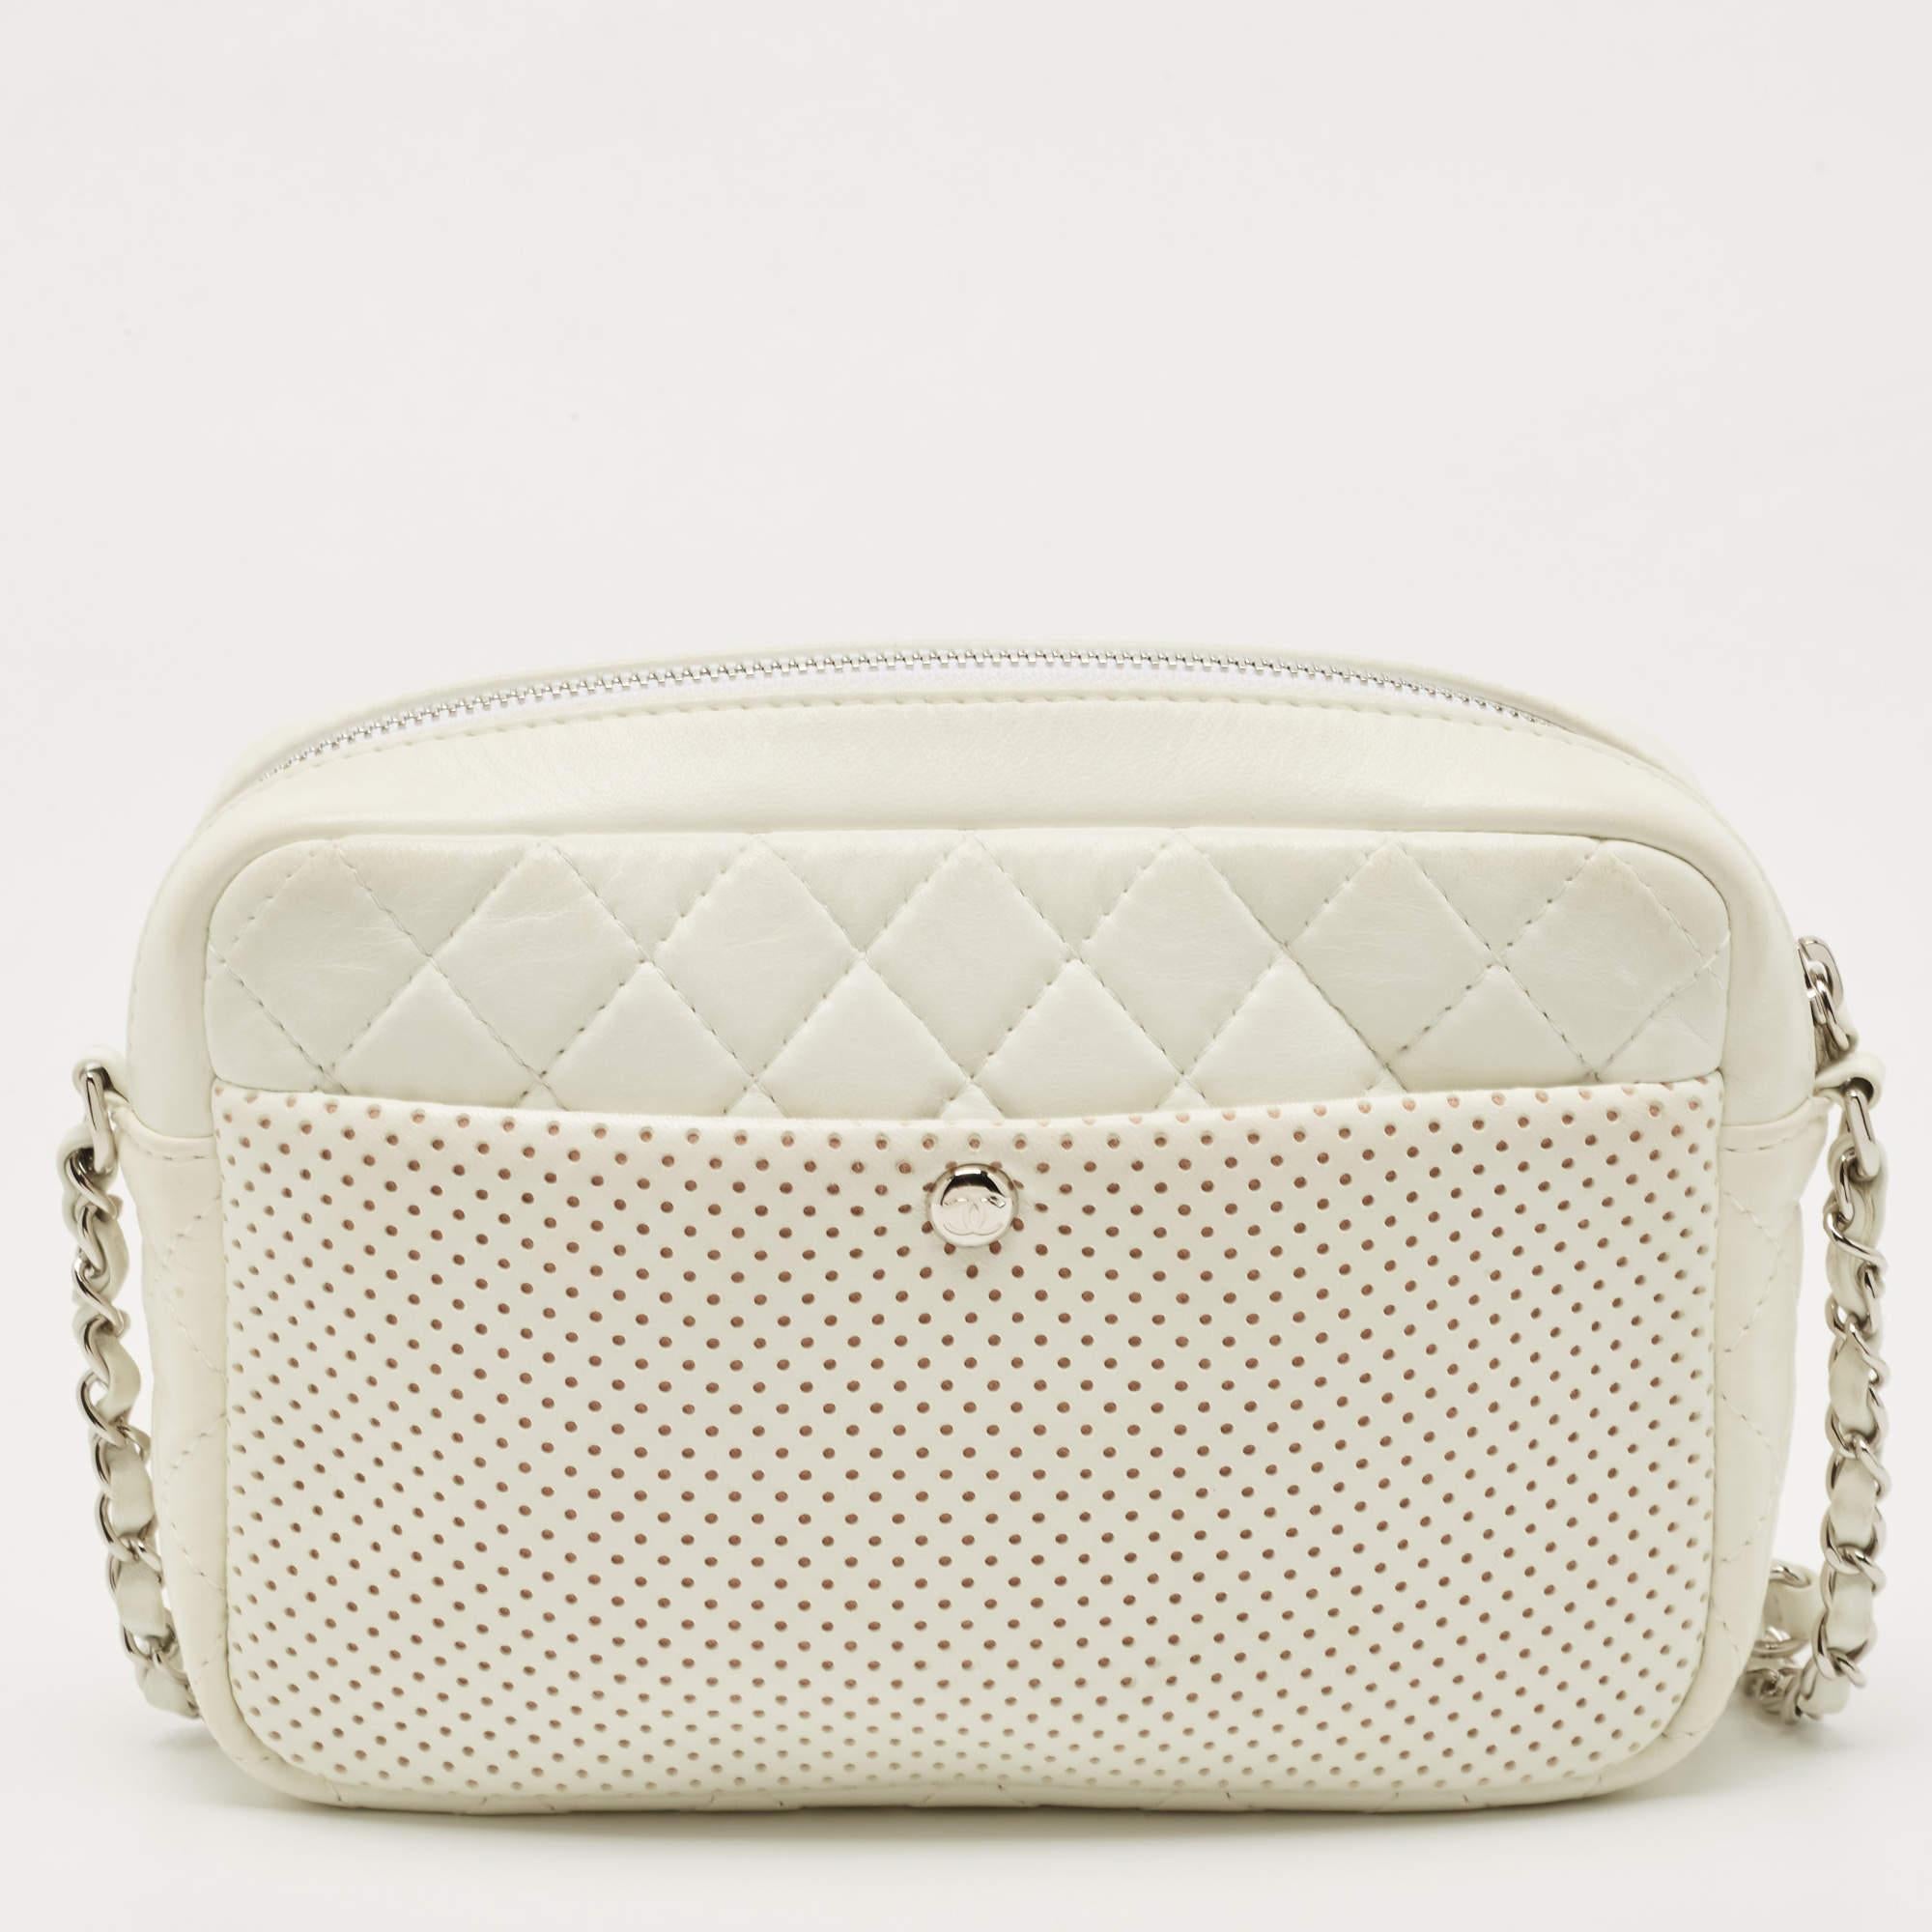 Chanel White Perforated Leather Ultra Pocket Camera Bag 10